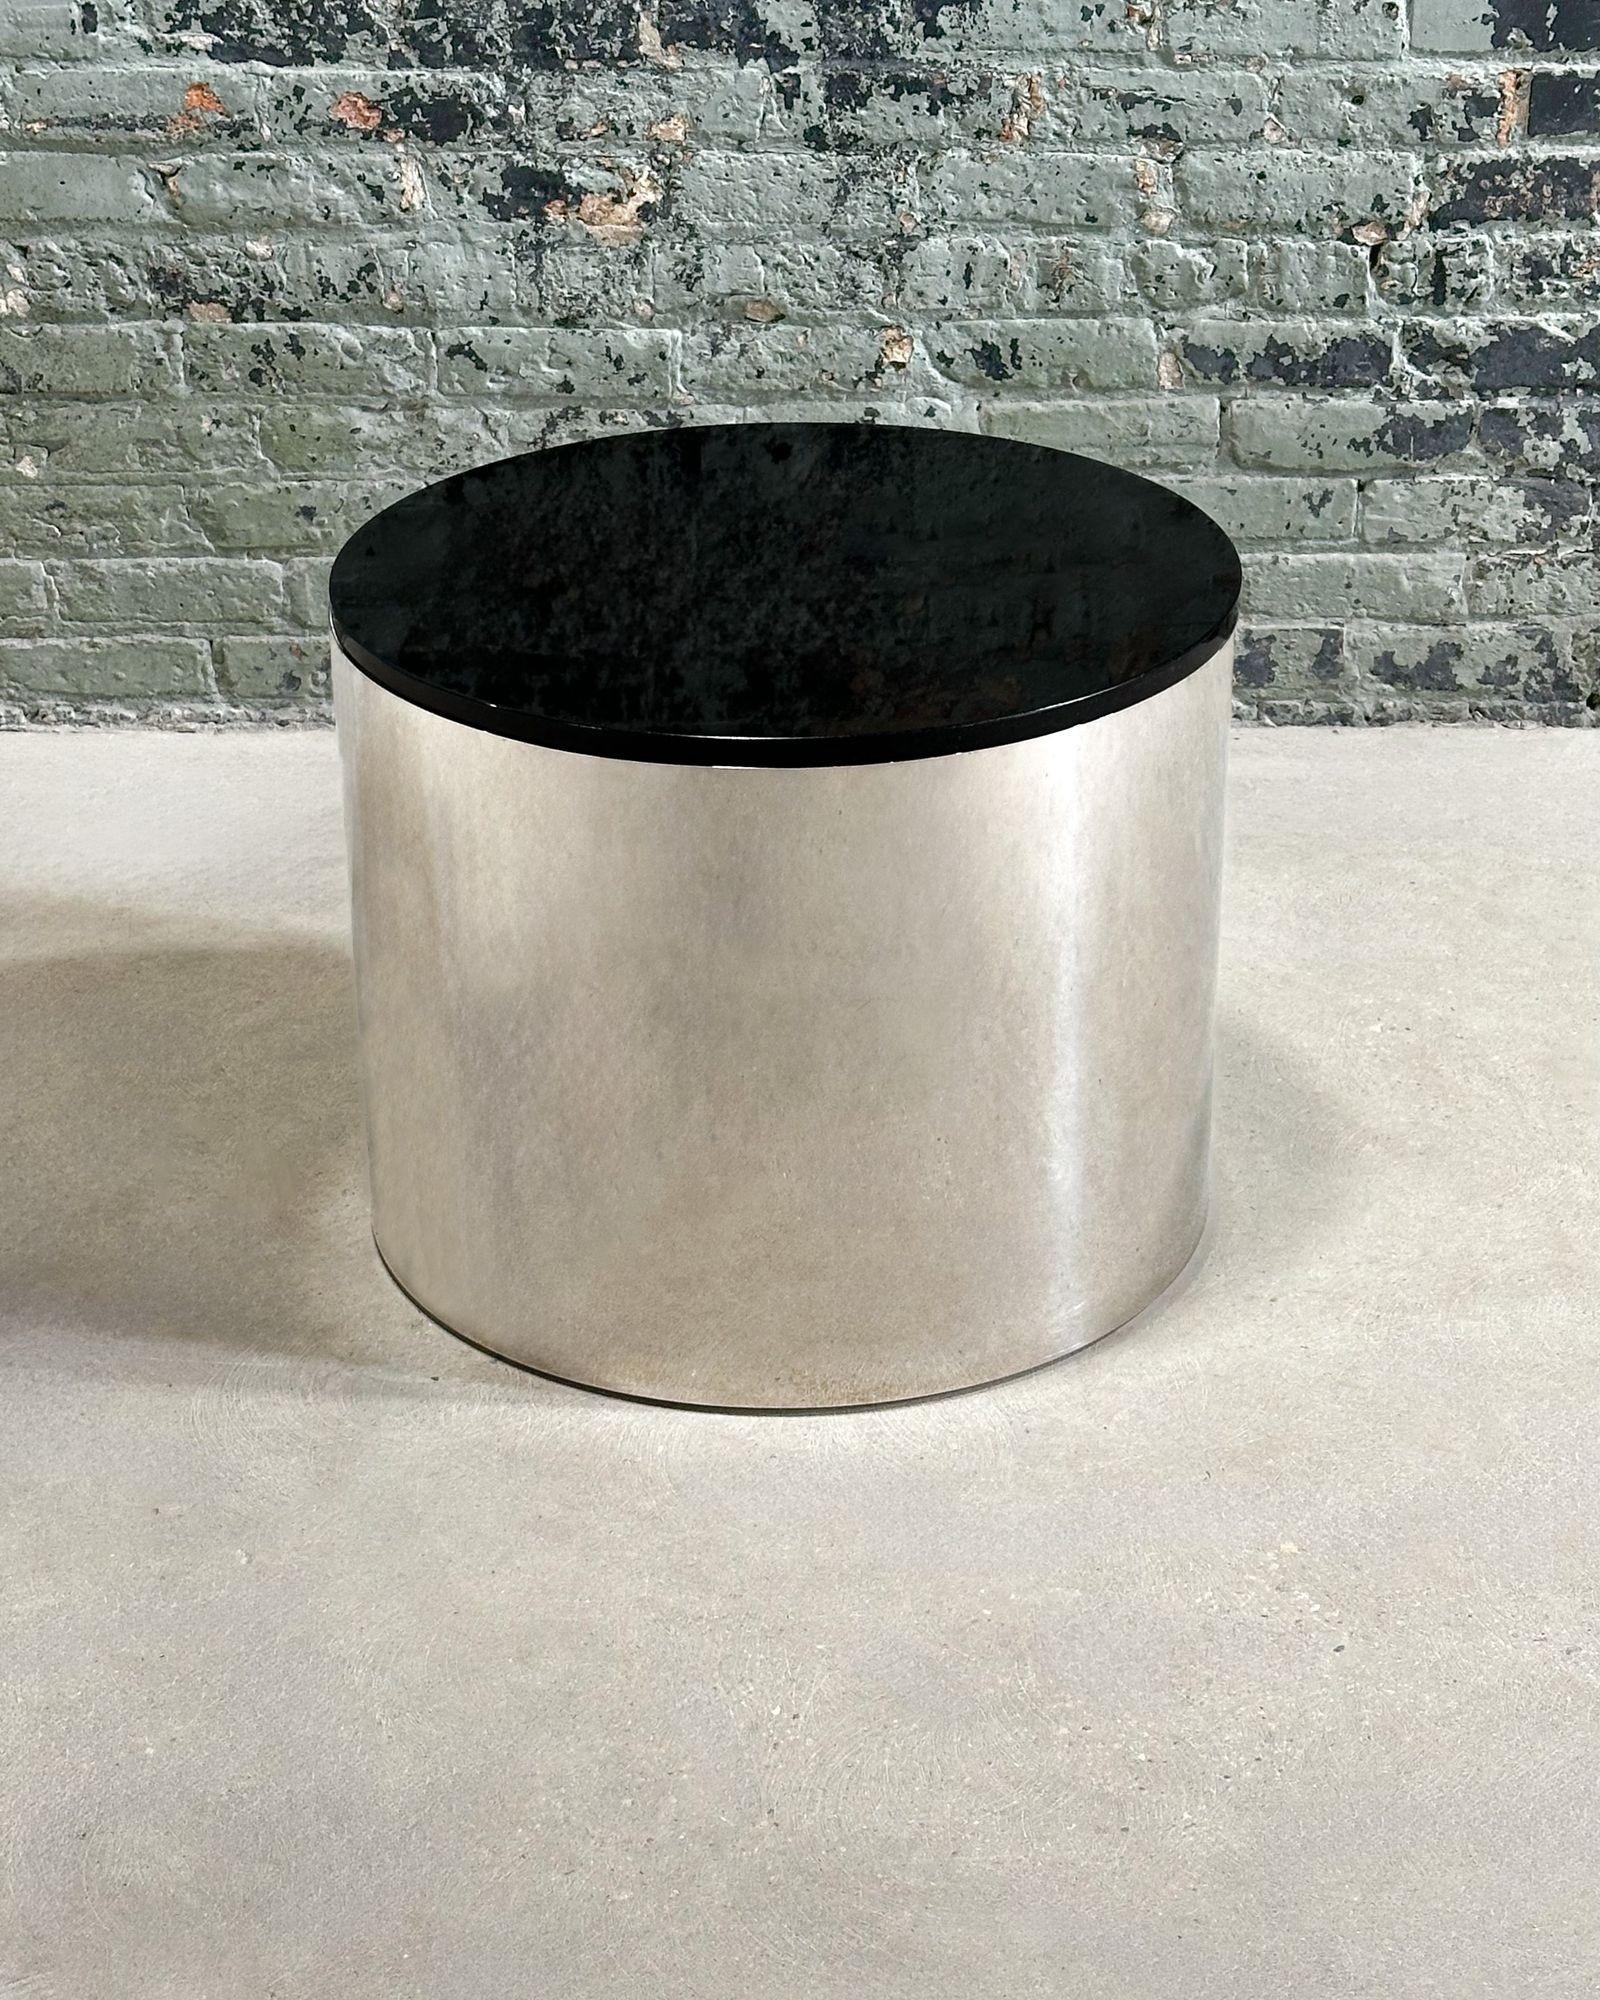 Brueton Polished Stainless Steel/Marble Drum side/end Table, 1970. Original with beautiful black marble.
Measures 18.75